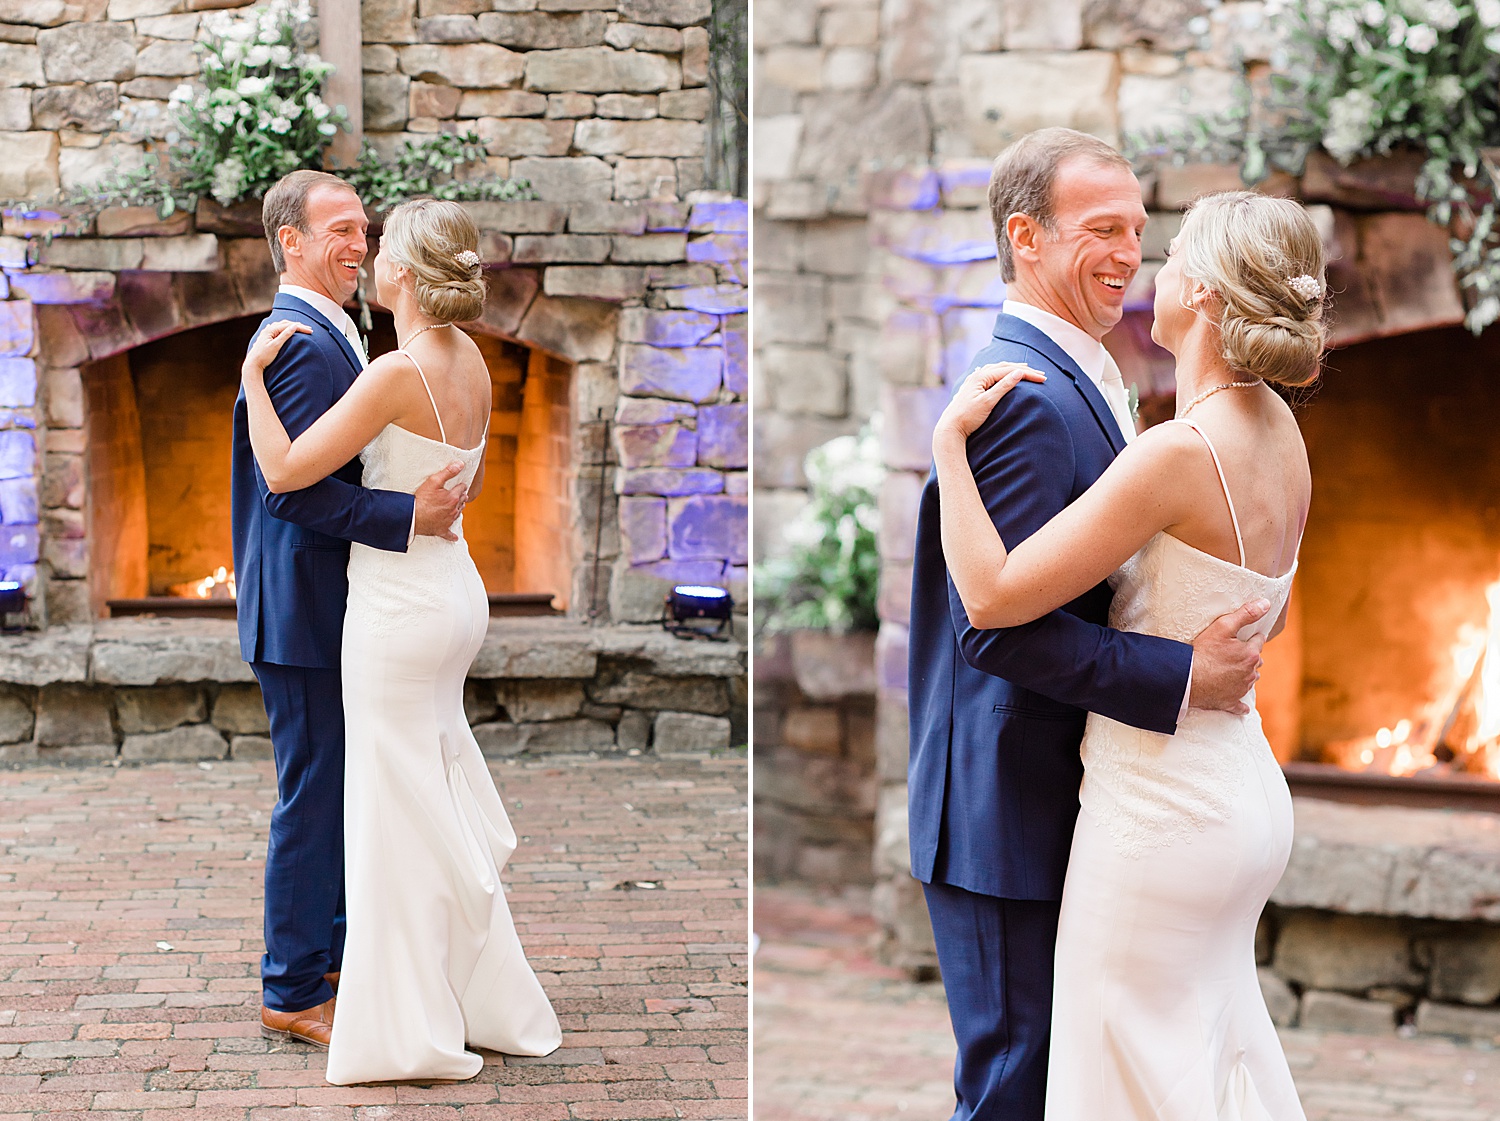 bride and groom share their first dance at wedding reception